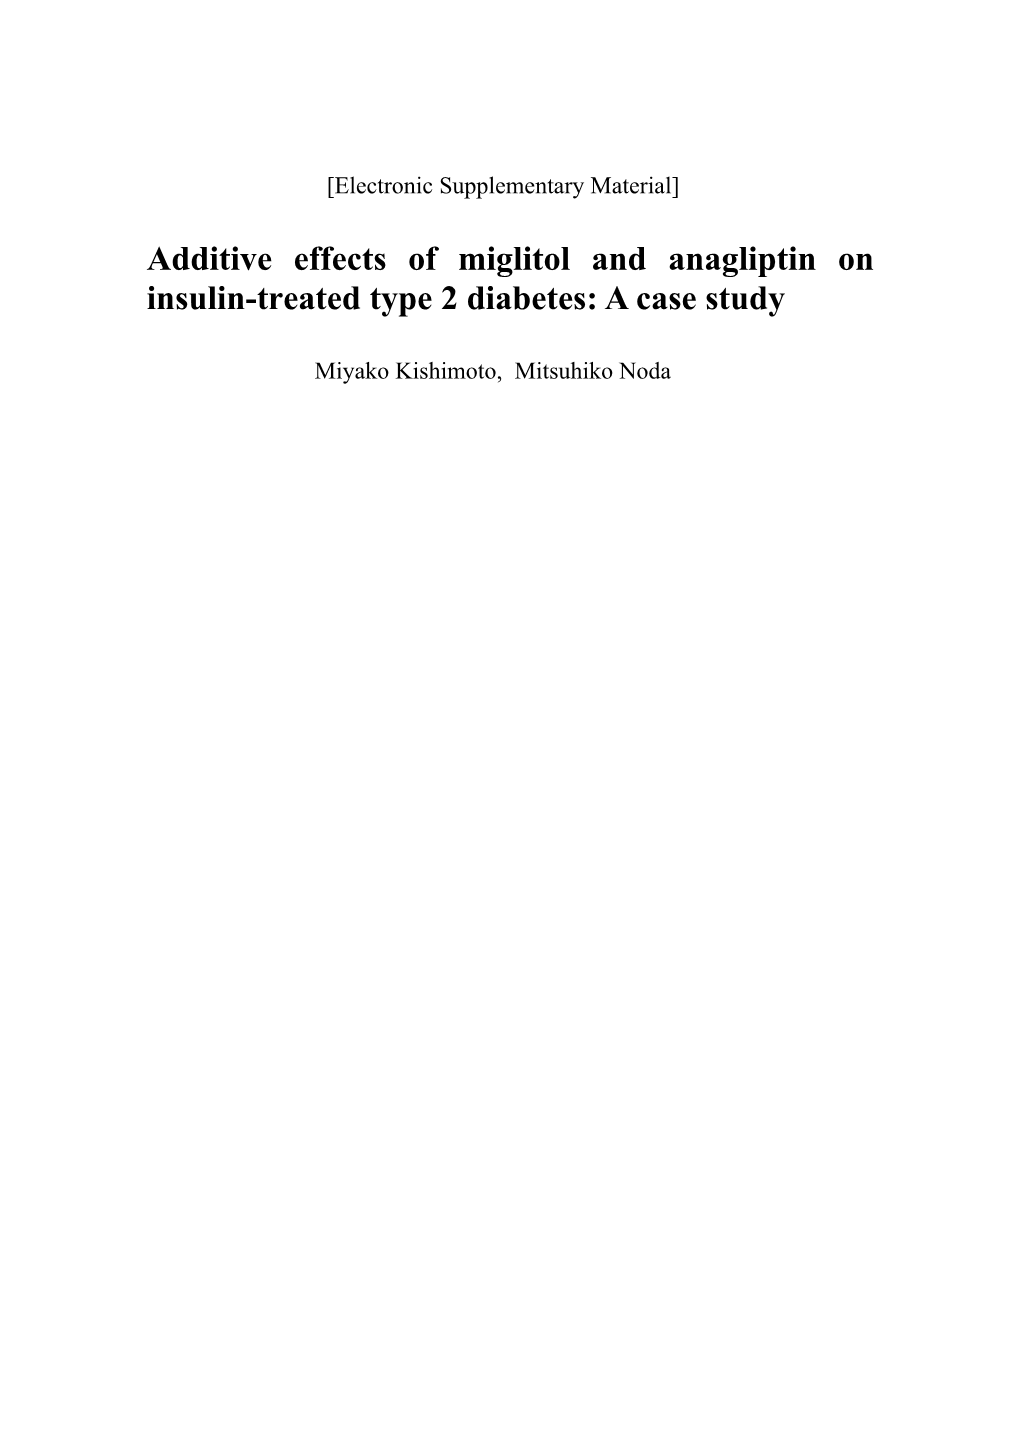 Additive Effects of Miglitol and Anagliptin on Insulin-Treated Type 2 Diabetes: a Case Study